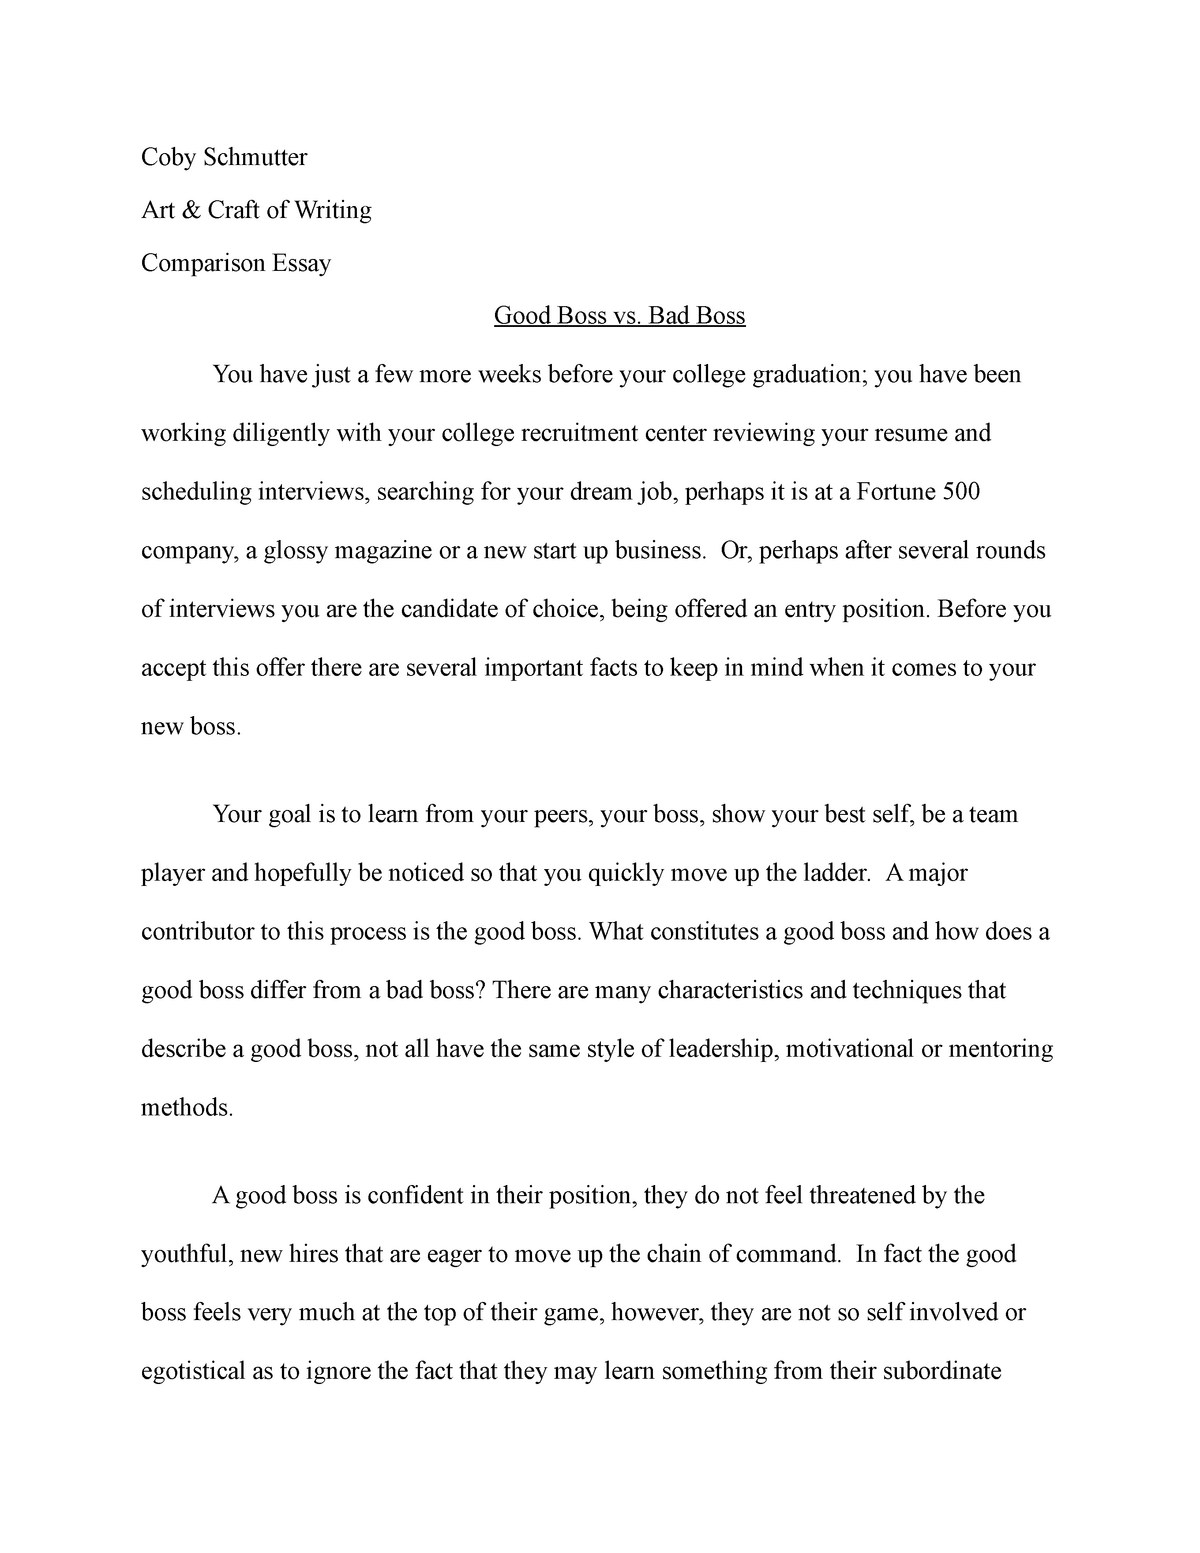 a good boss and a bad boss essay